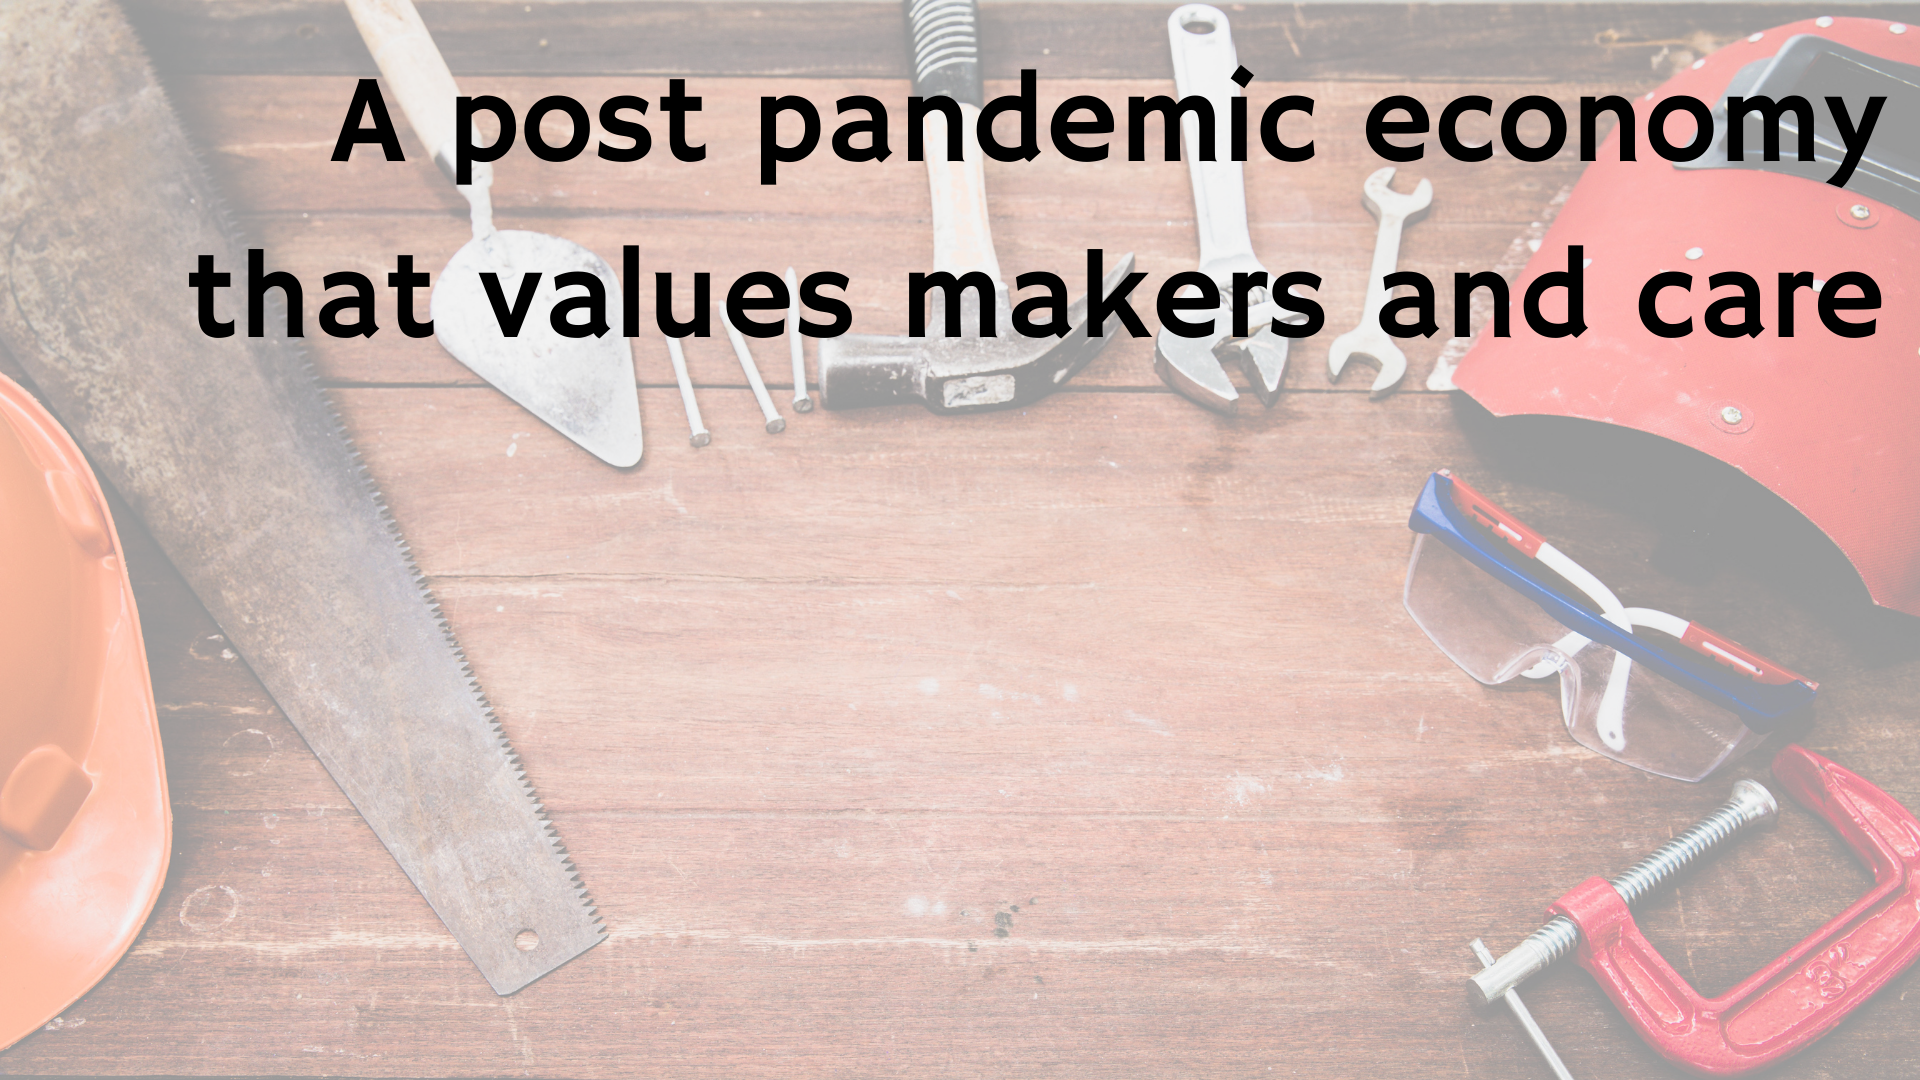 A post pandemic economy that values makers and care